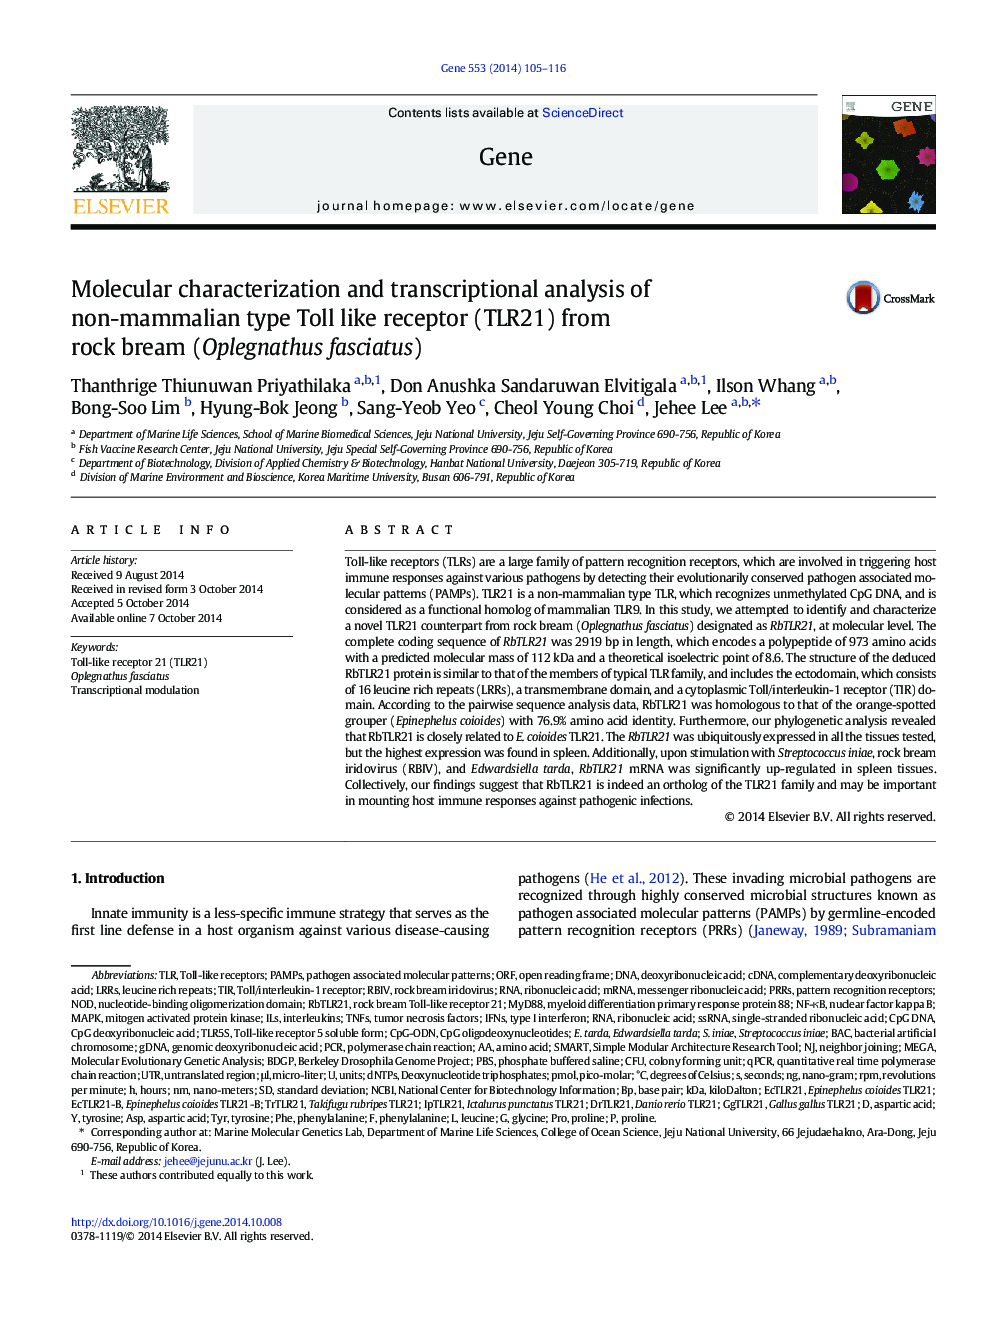 Molecular characterization and transcriptional analysis of non-mammalian type Toll like receptor (TLR21) from rock bream (Oplegnathus fasciatus)